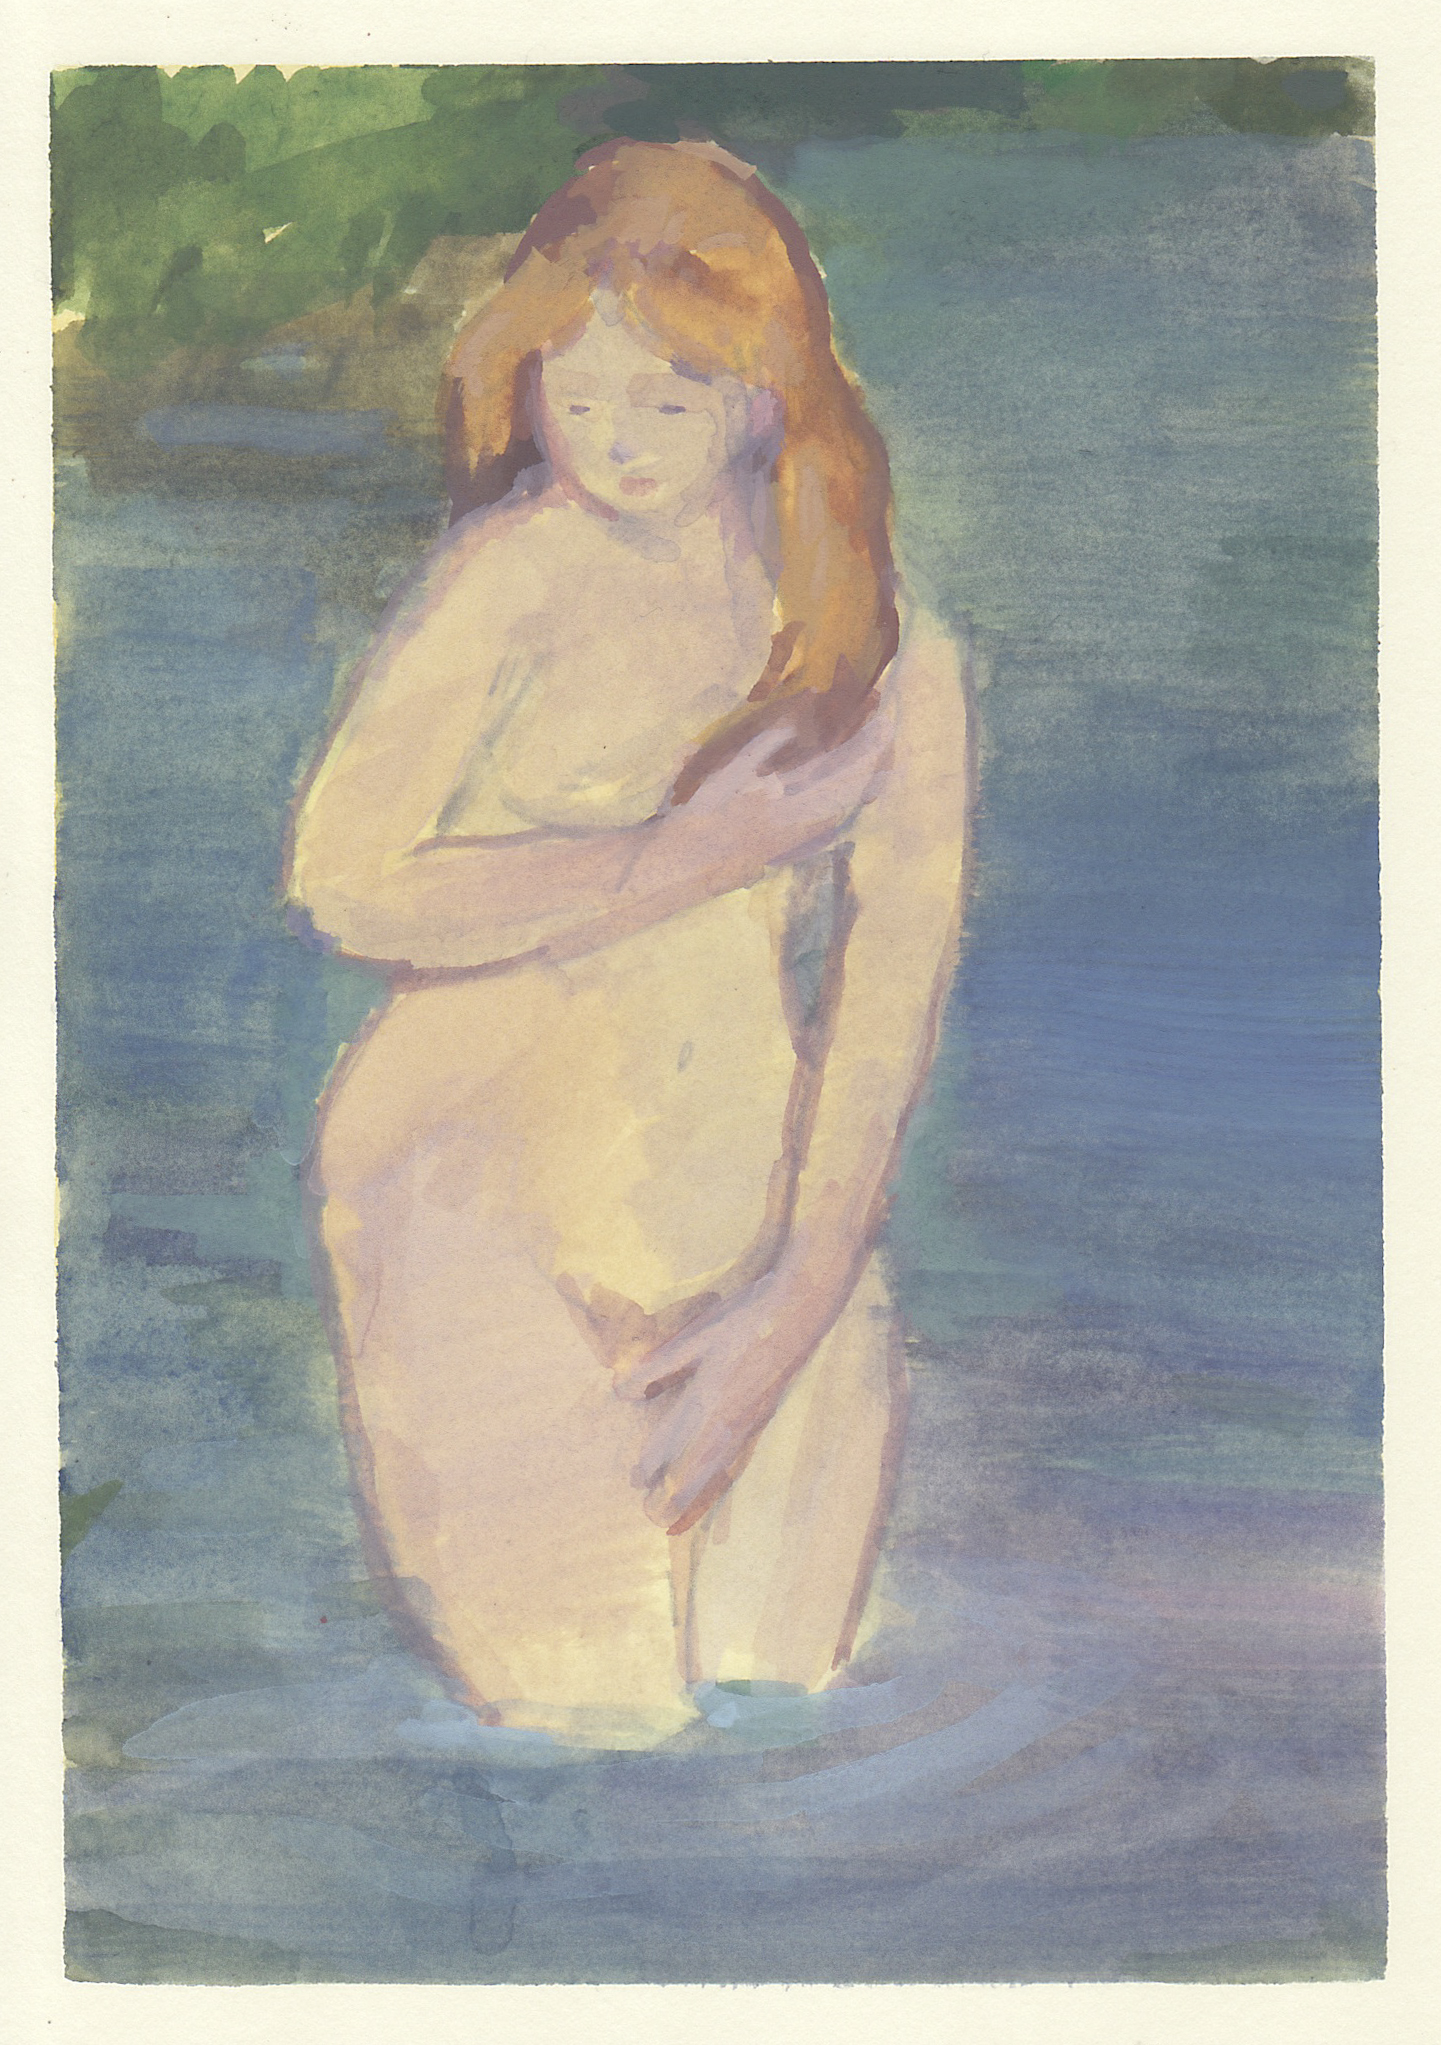    bather     watercolor and gouache on paper 4.5x6.5" 2018  private collection New York City 